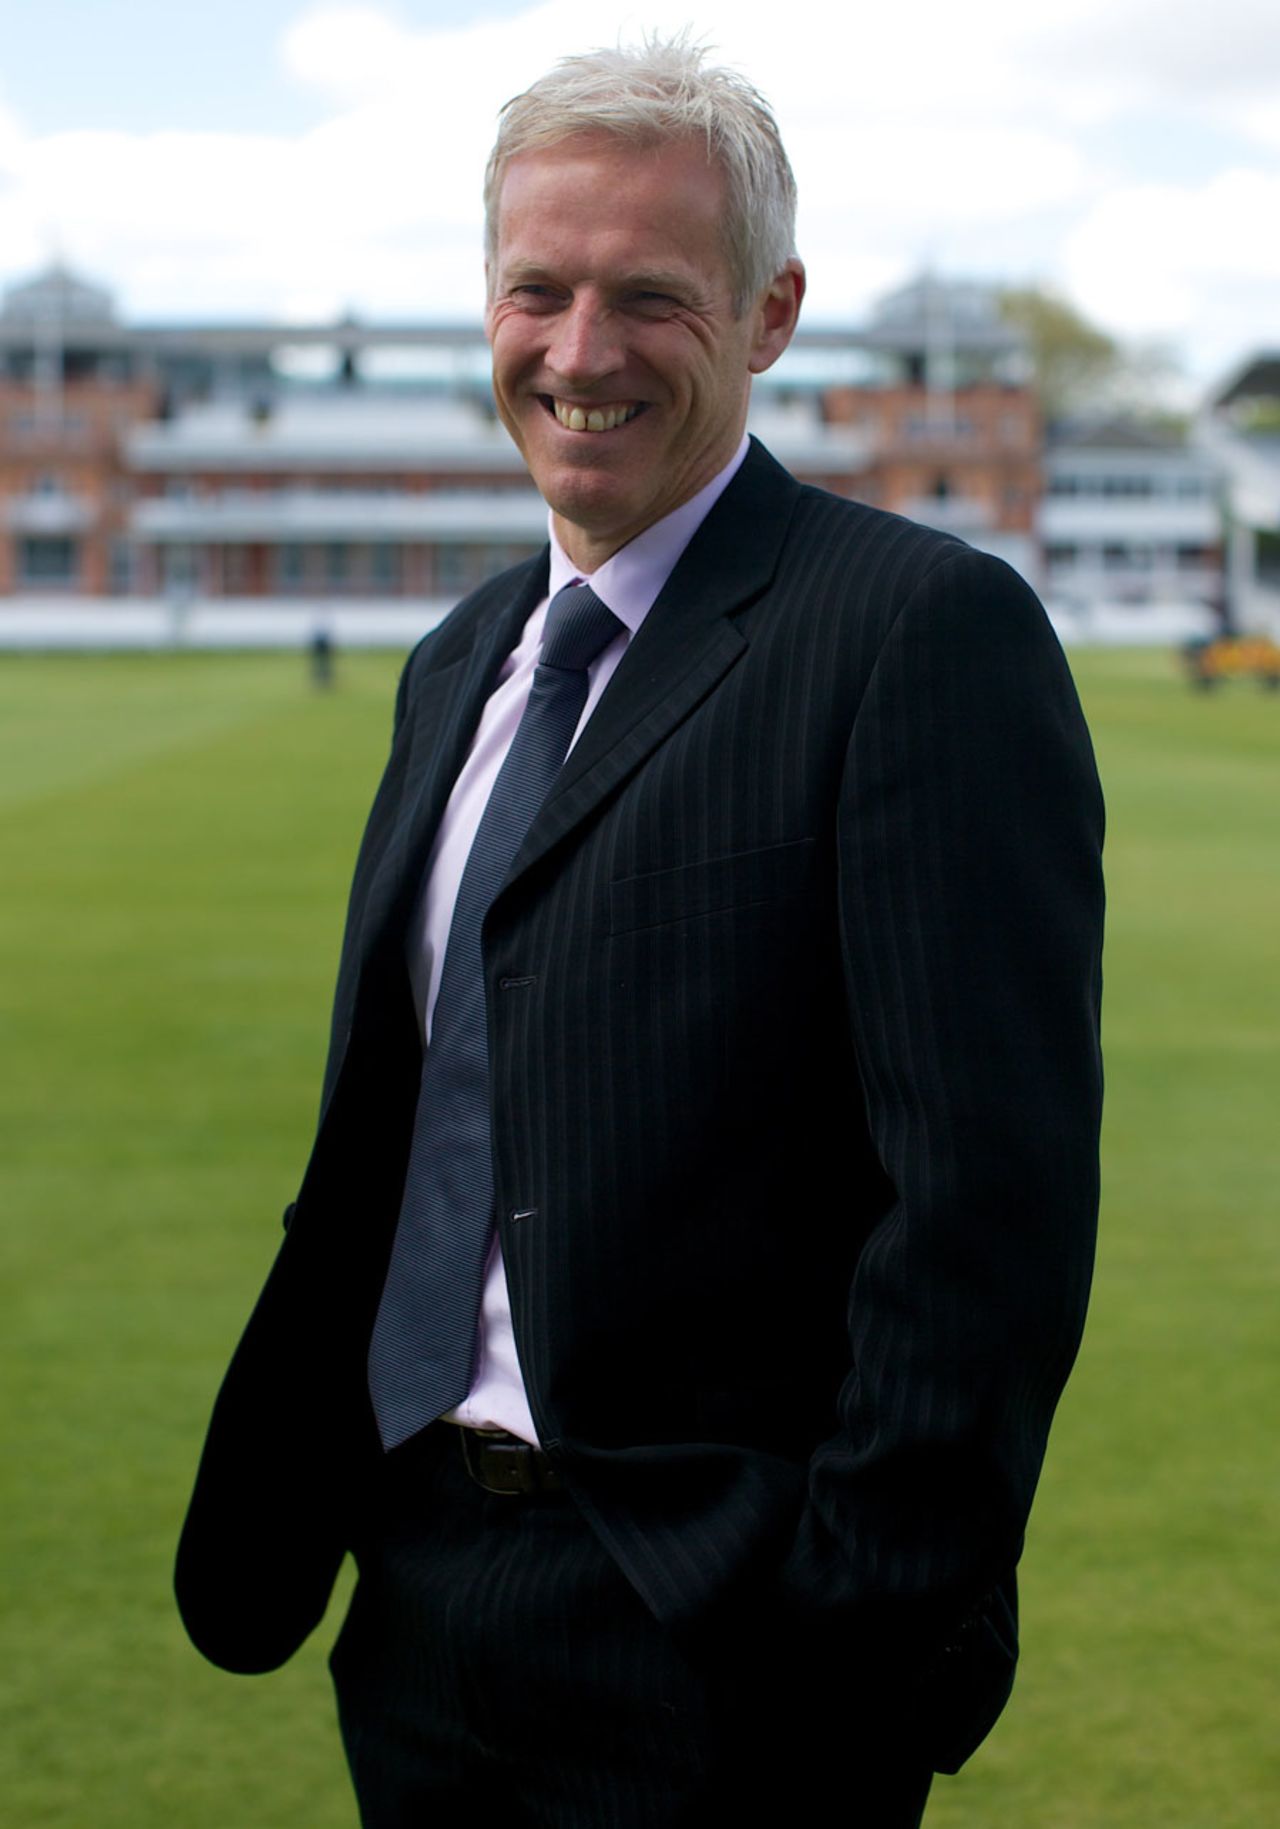 Peter Moores has been reappointed England's head coach, Lord's, April 19, 2014